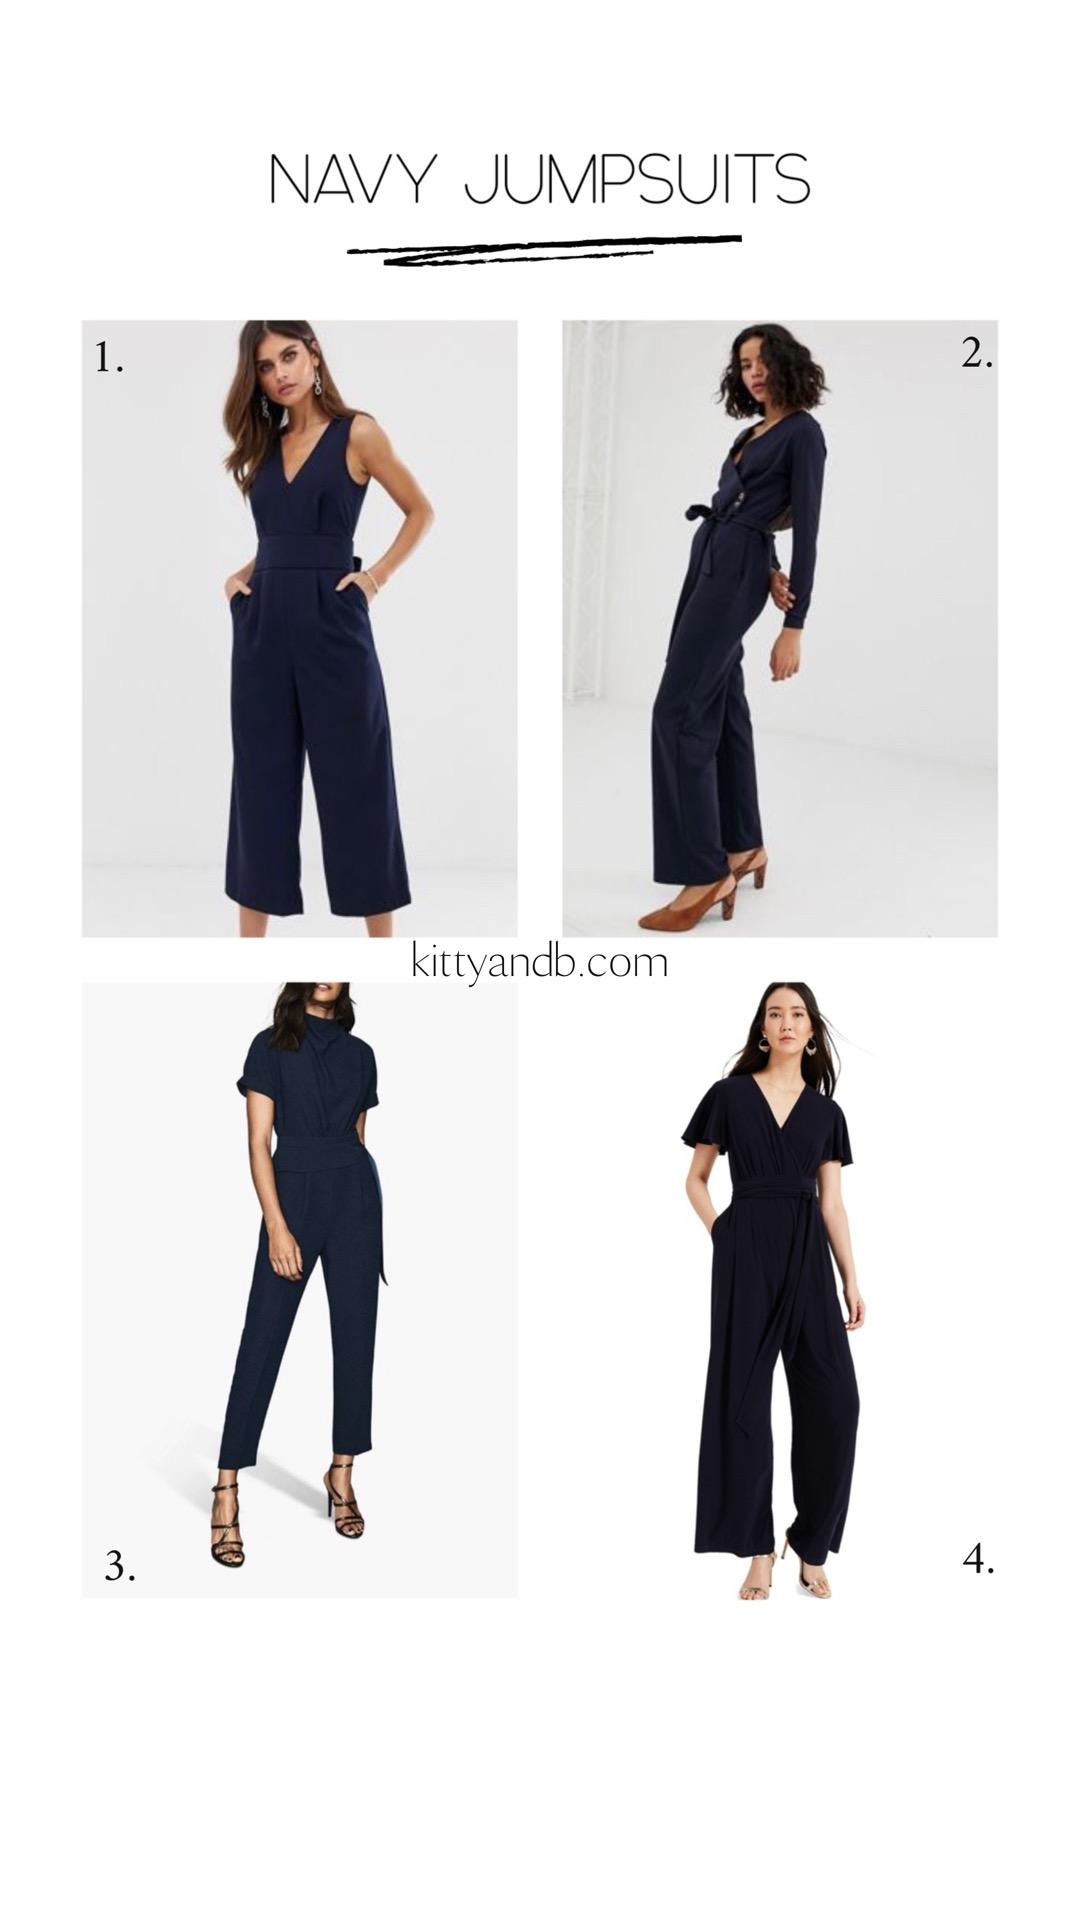 Navy Jumpsuits for all! Navy jumpsuits are classic and stylish and so here are 4 options and the shoes to wear with a jumpsuit | kittyandb.com #jumpsuits #navy #howtowear #outfitideas